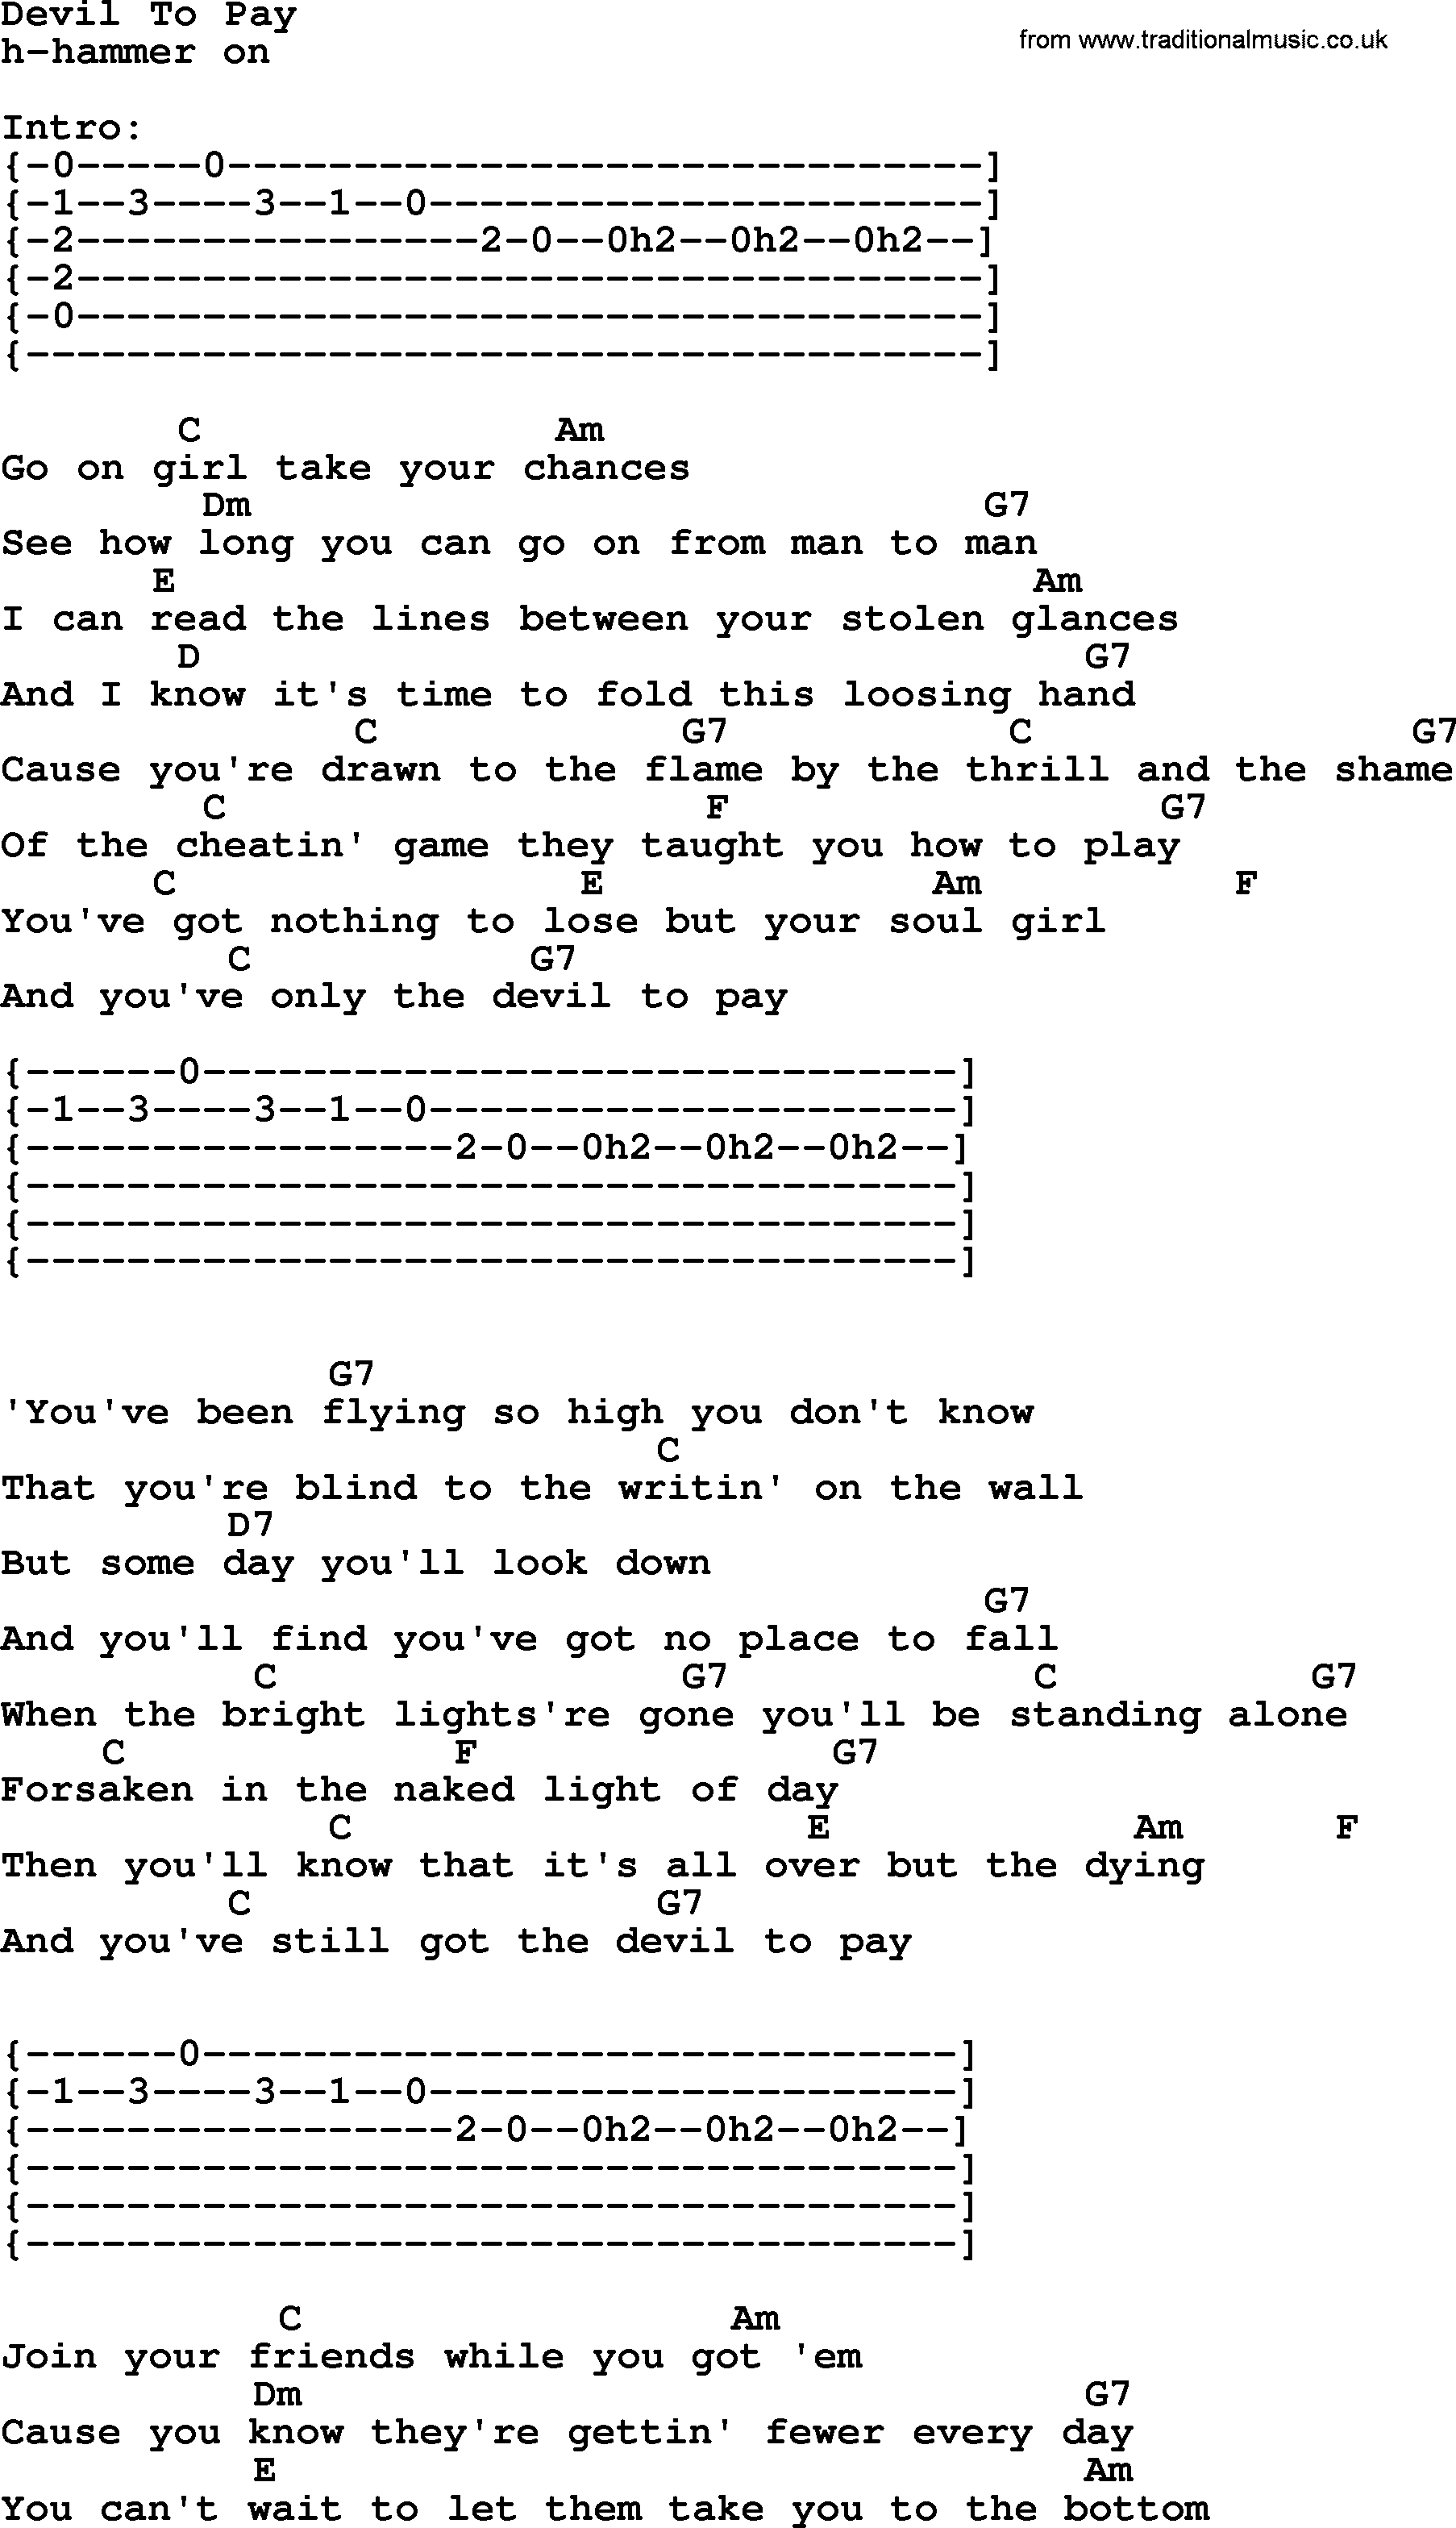 Johnny Cash song Devil To Pay, lyrics and chords